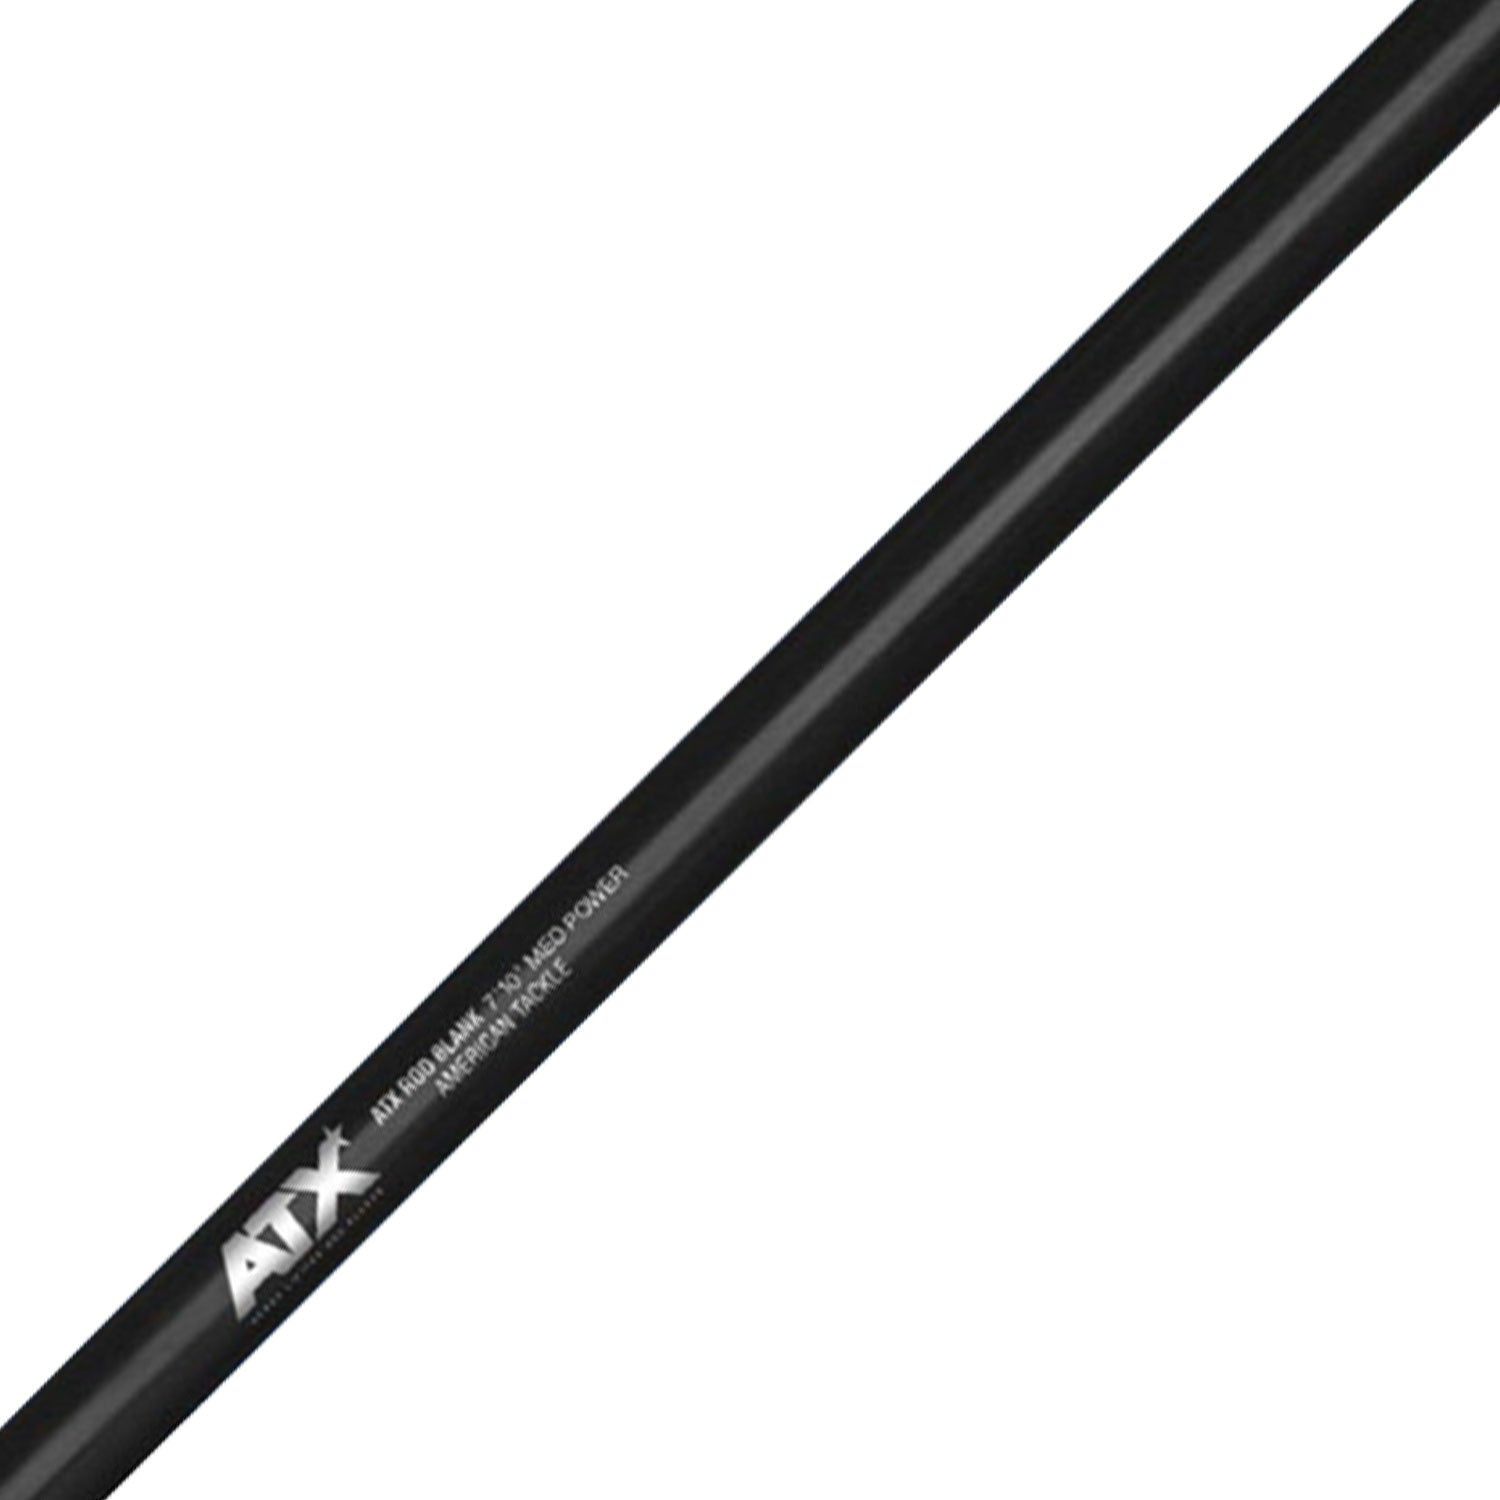 American Tackle AXGC60H Graphite Composite Rod Blank